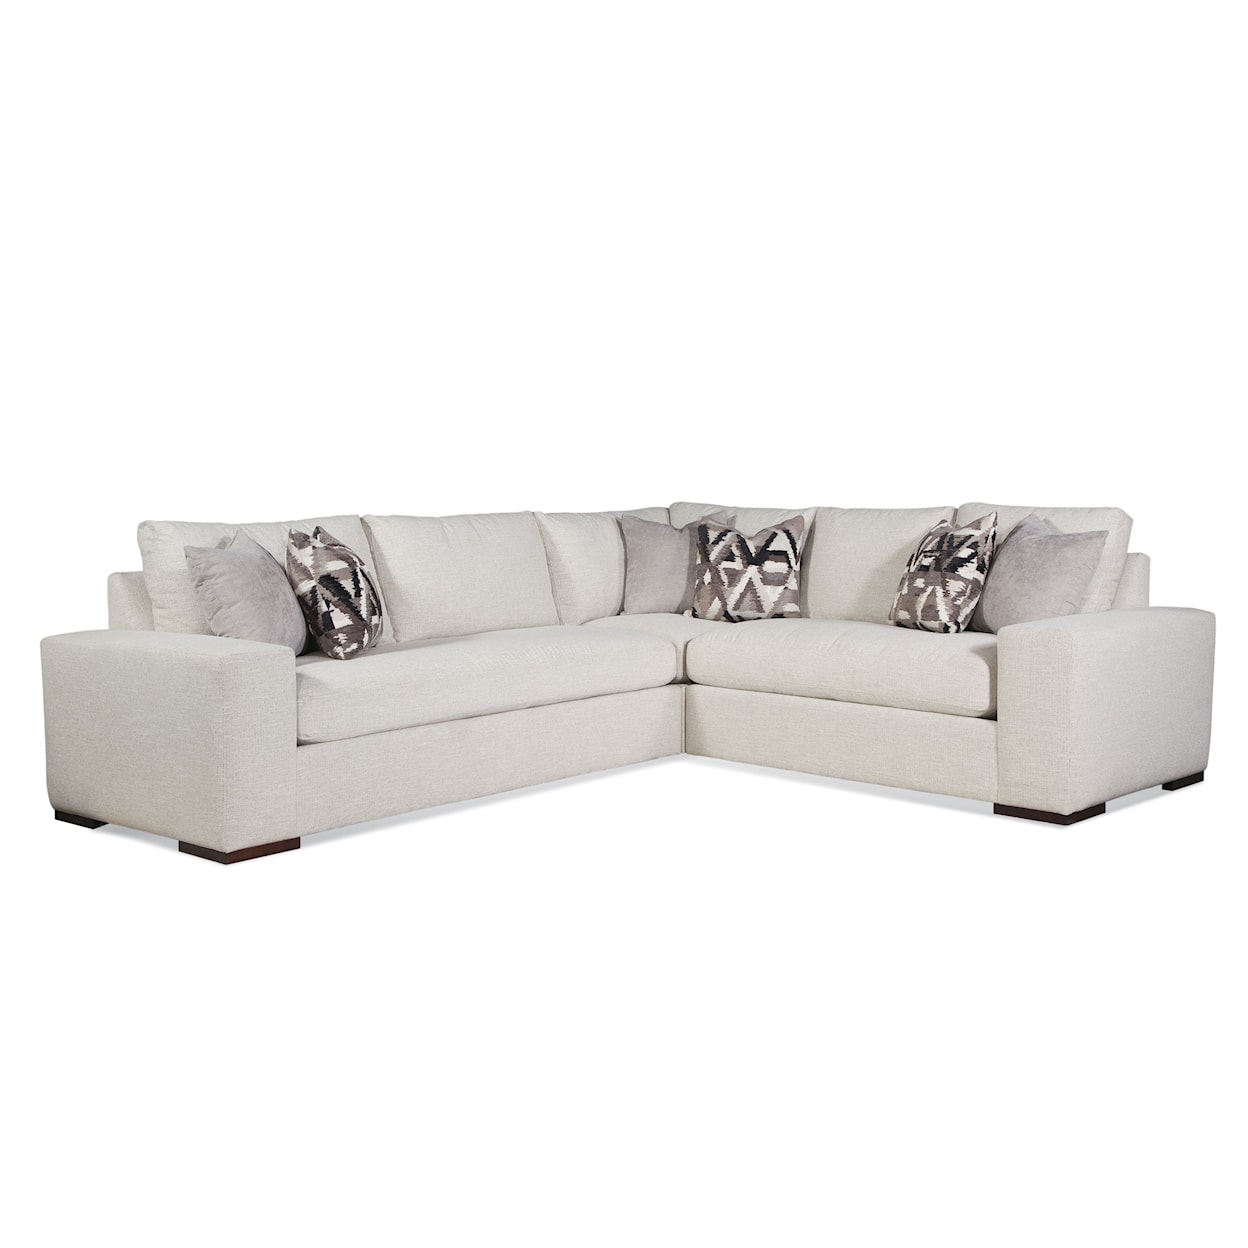 Braxton Culler Memphis Three Piece Bench Seat L Sectional